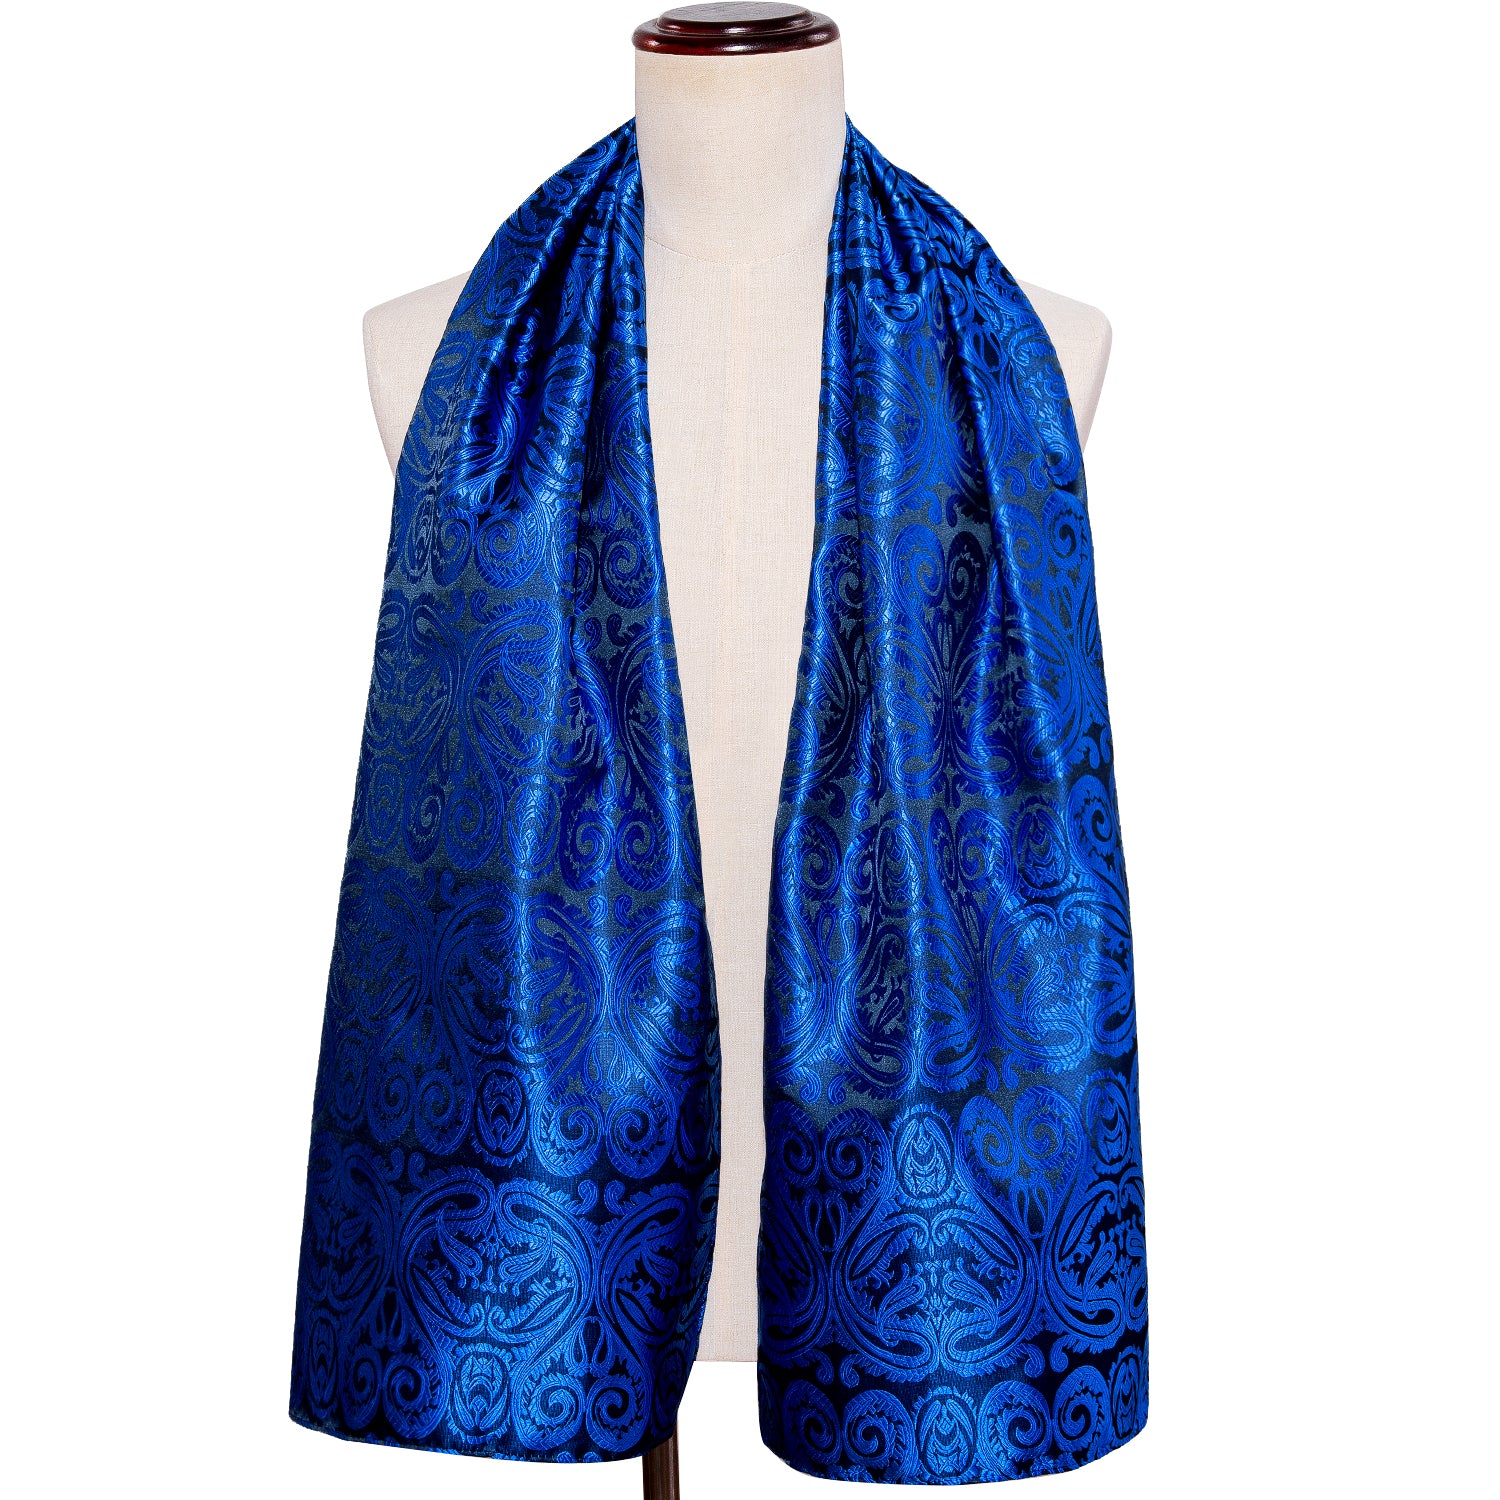 New Luxury Blue Paisley Scarf with Tie Set